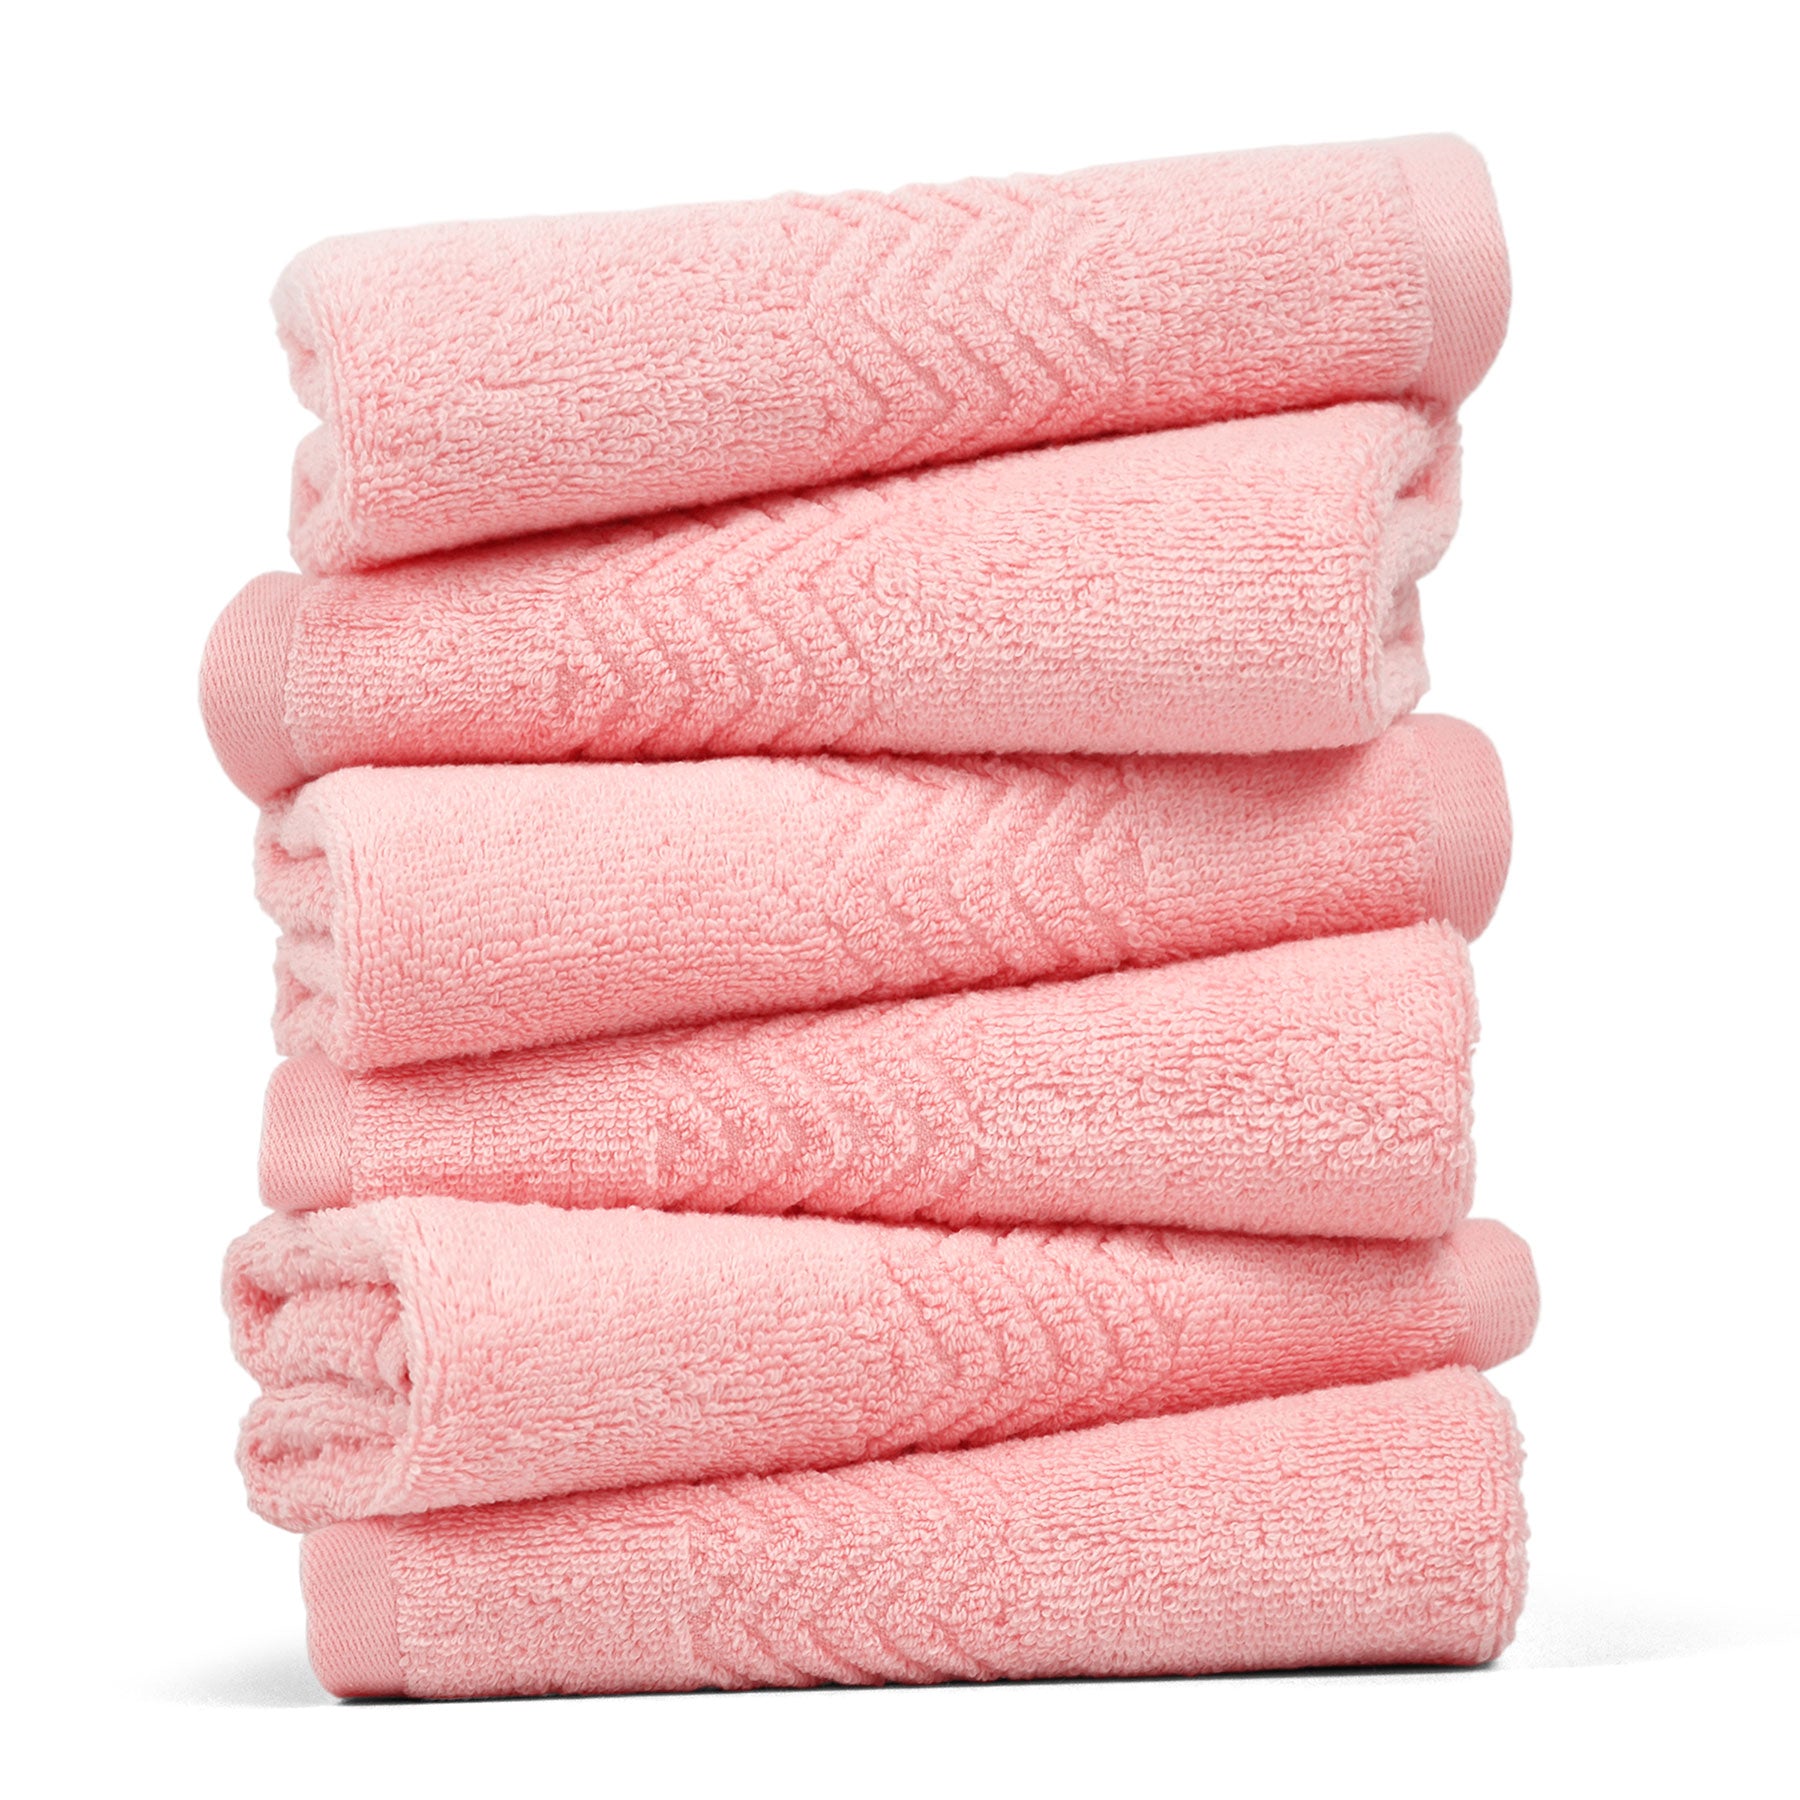  Cleanbear Face-Cloth Washcloths Set,100% Cotton, High  Absorbent, 6-Pack 6 Colors, Size13 x13-deep Color : Home & Kitchen